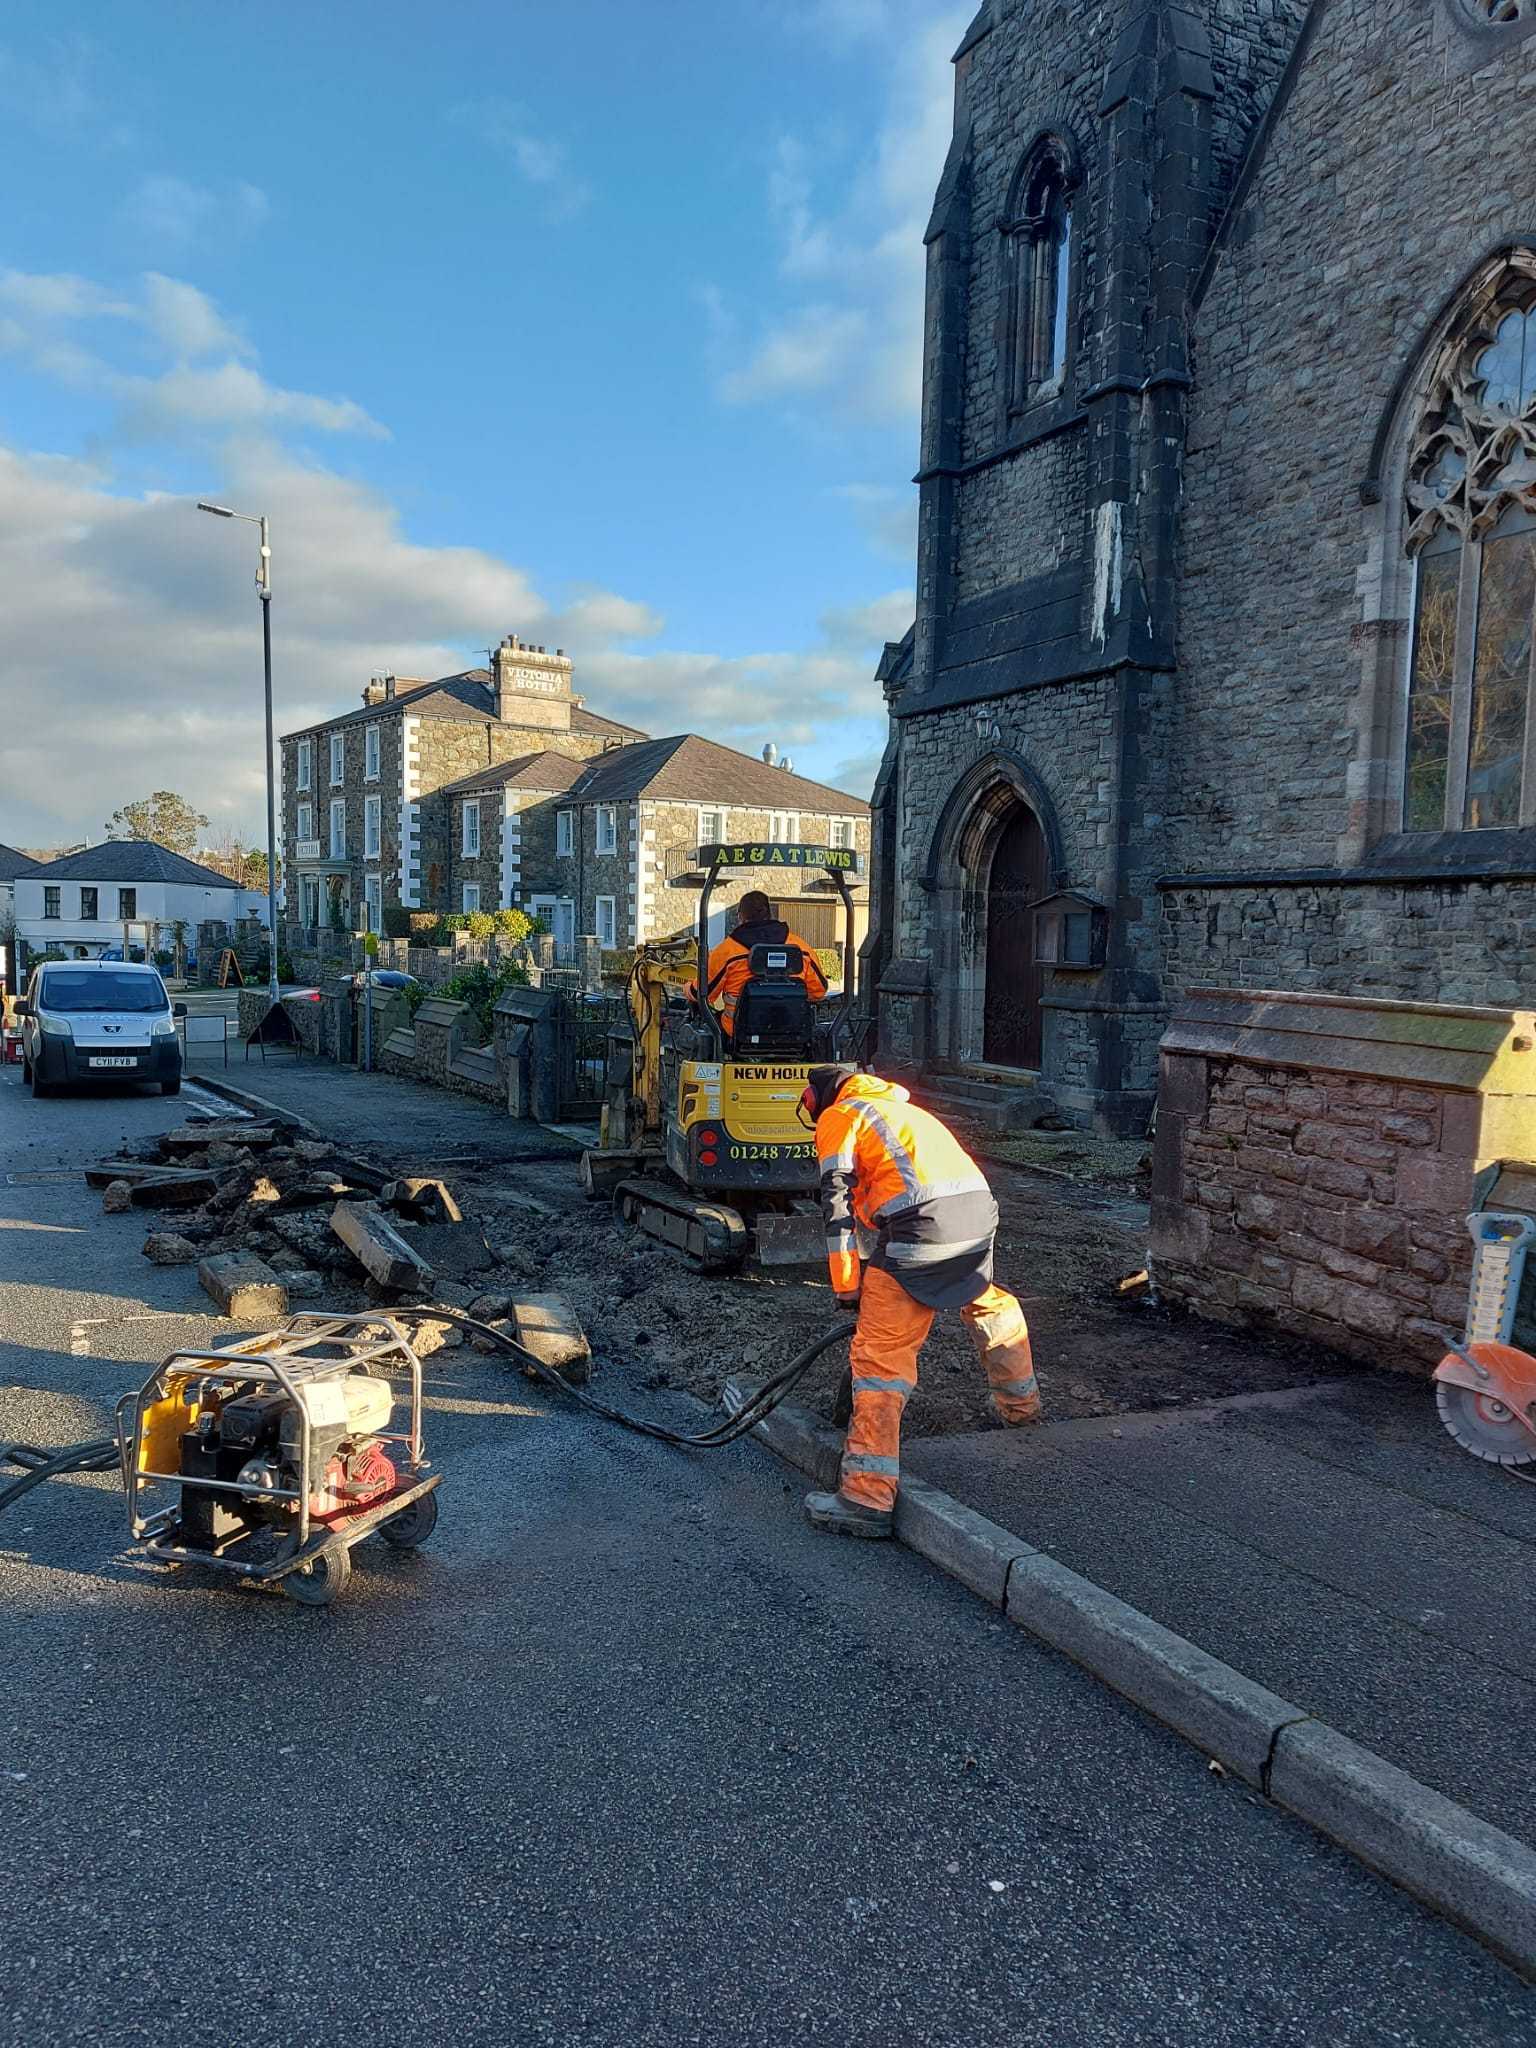 English Presbyterian Church, Menai Bridge - work to the entrance will soon be completed (Image C Allison and H Williams)